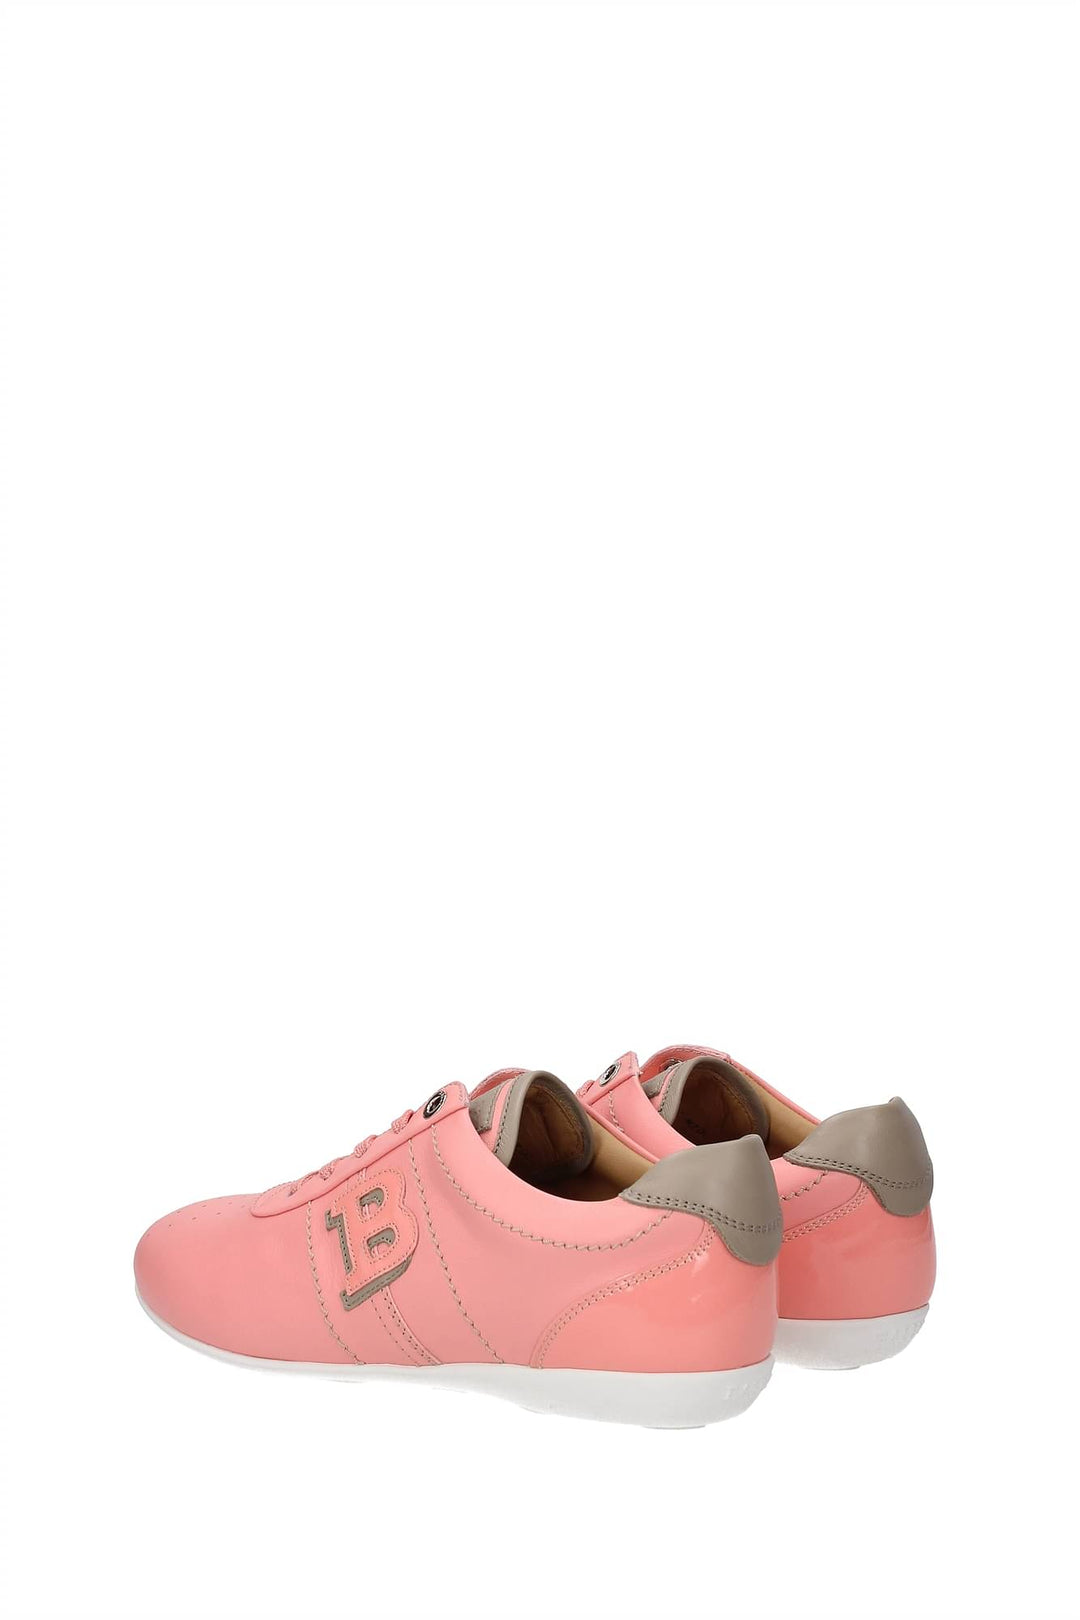 Sneakers Pelle Rosa - Bally - Donna